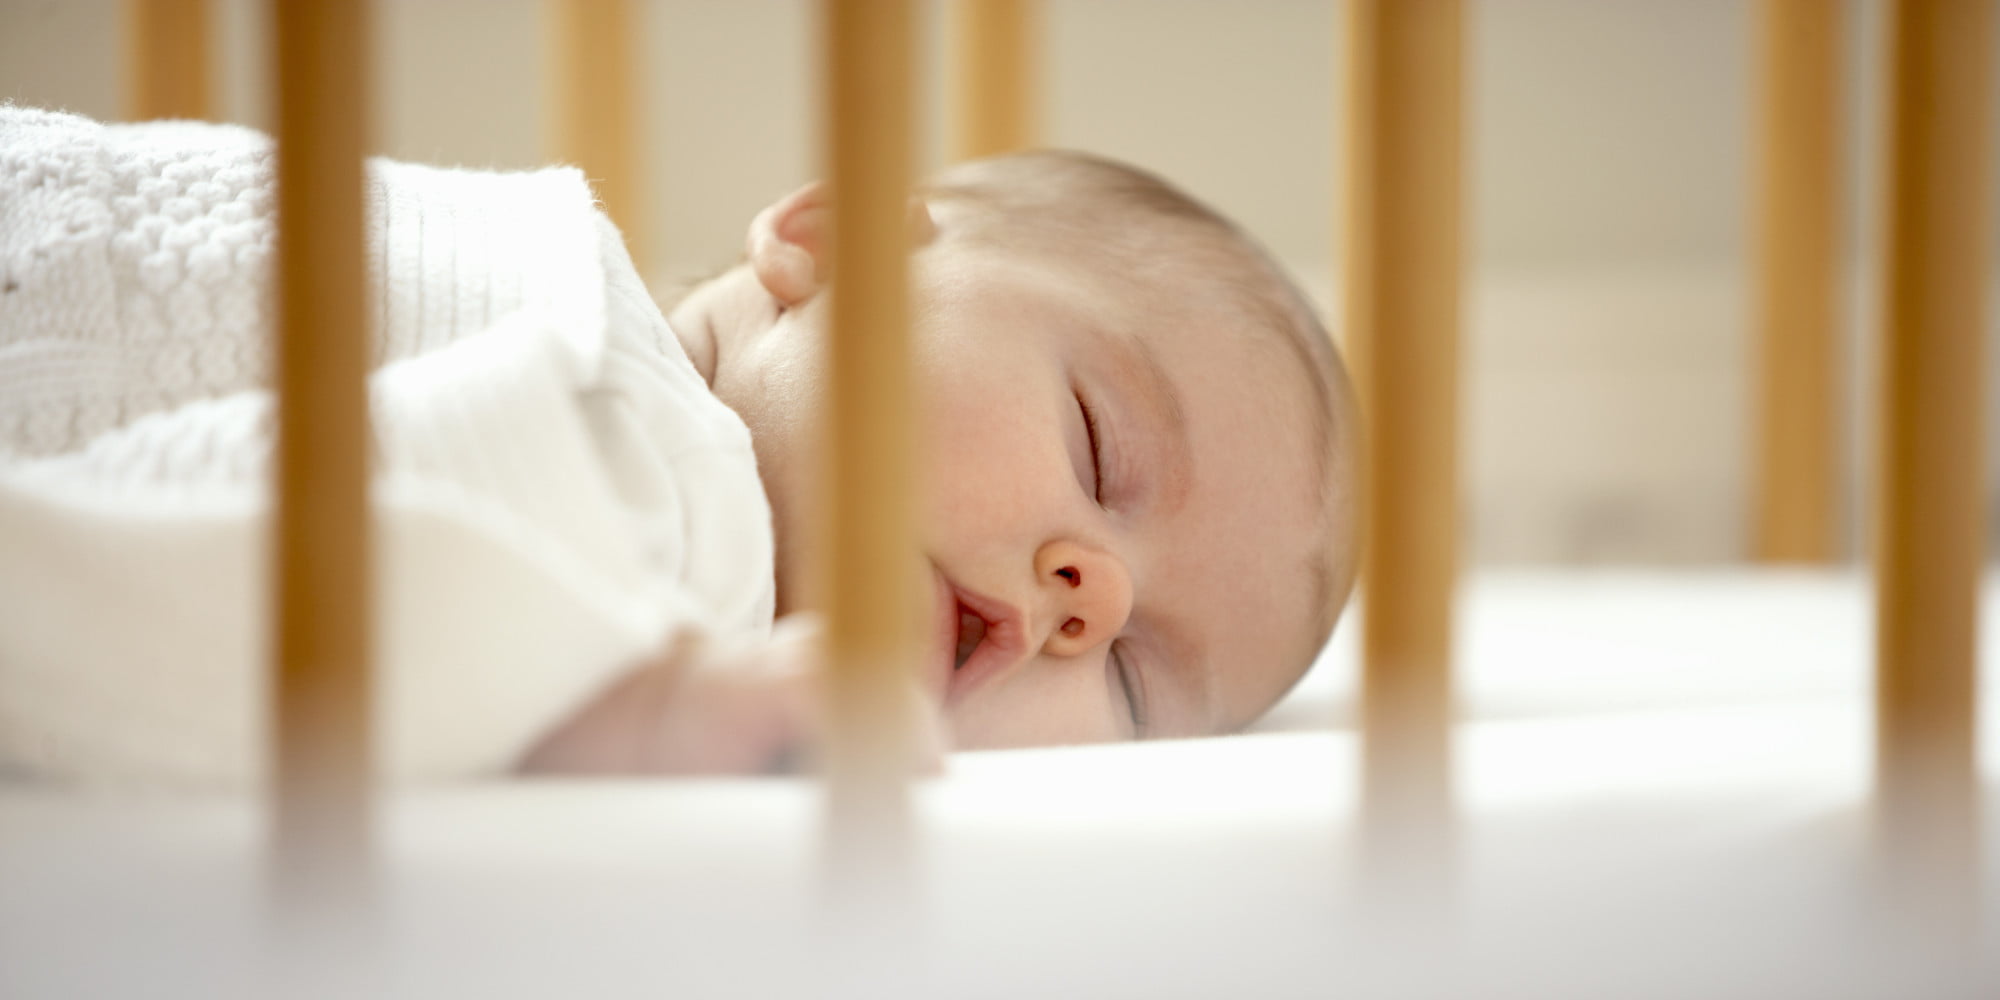 Baby sleeping tips 01 - Infant bed